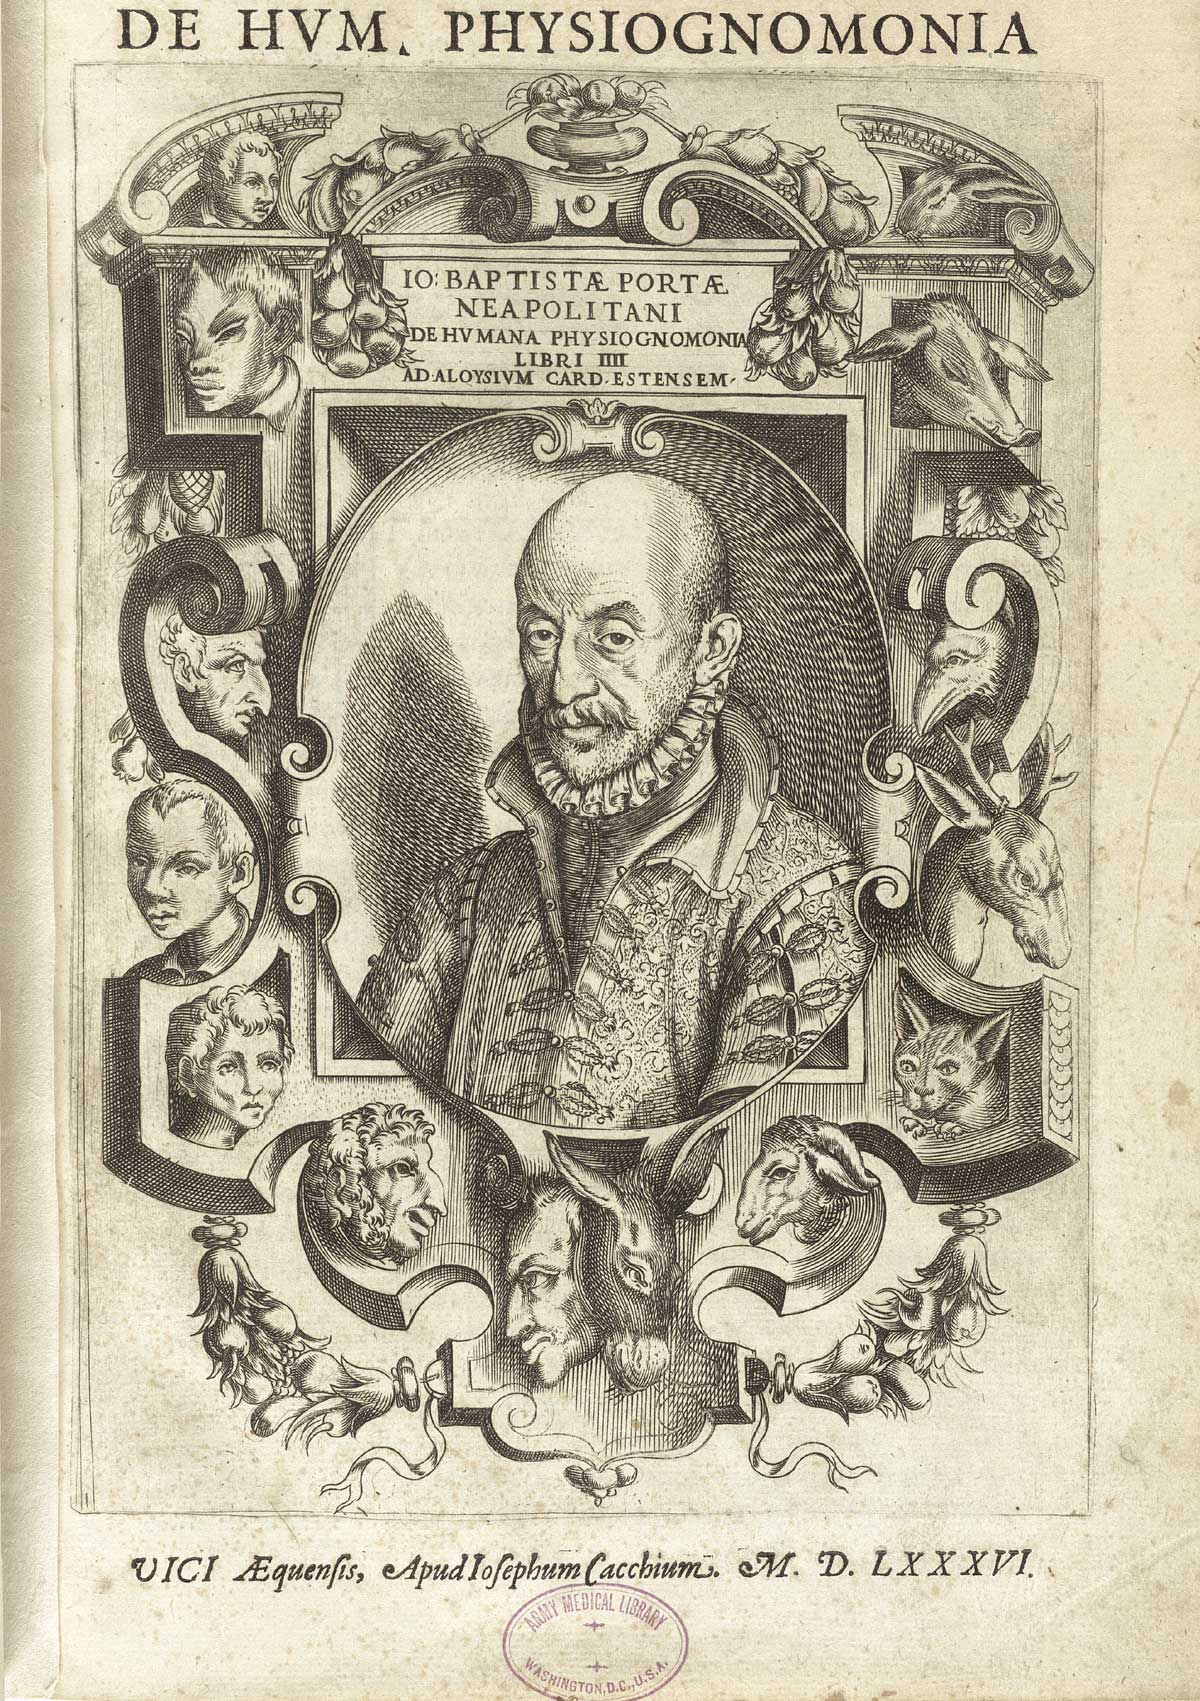 Title page of Giambattista della Porta's De humana physiognomonia libri IIII, featuring the head and shoulders view of Porta in an oval surrounded on the left by faces of humans and on the right faces of animals.